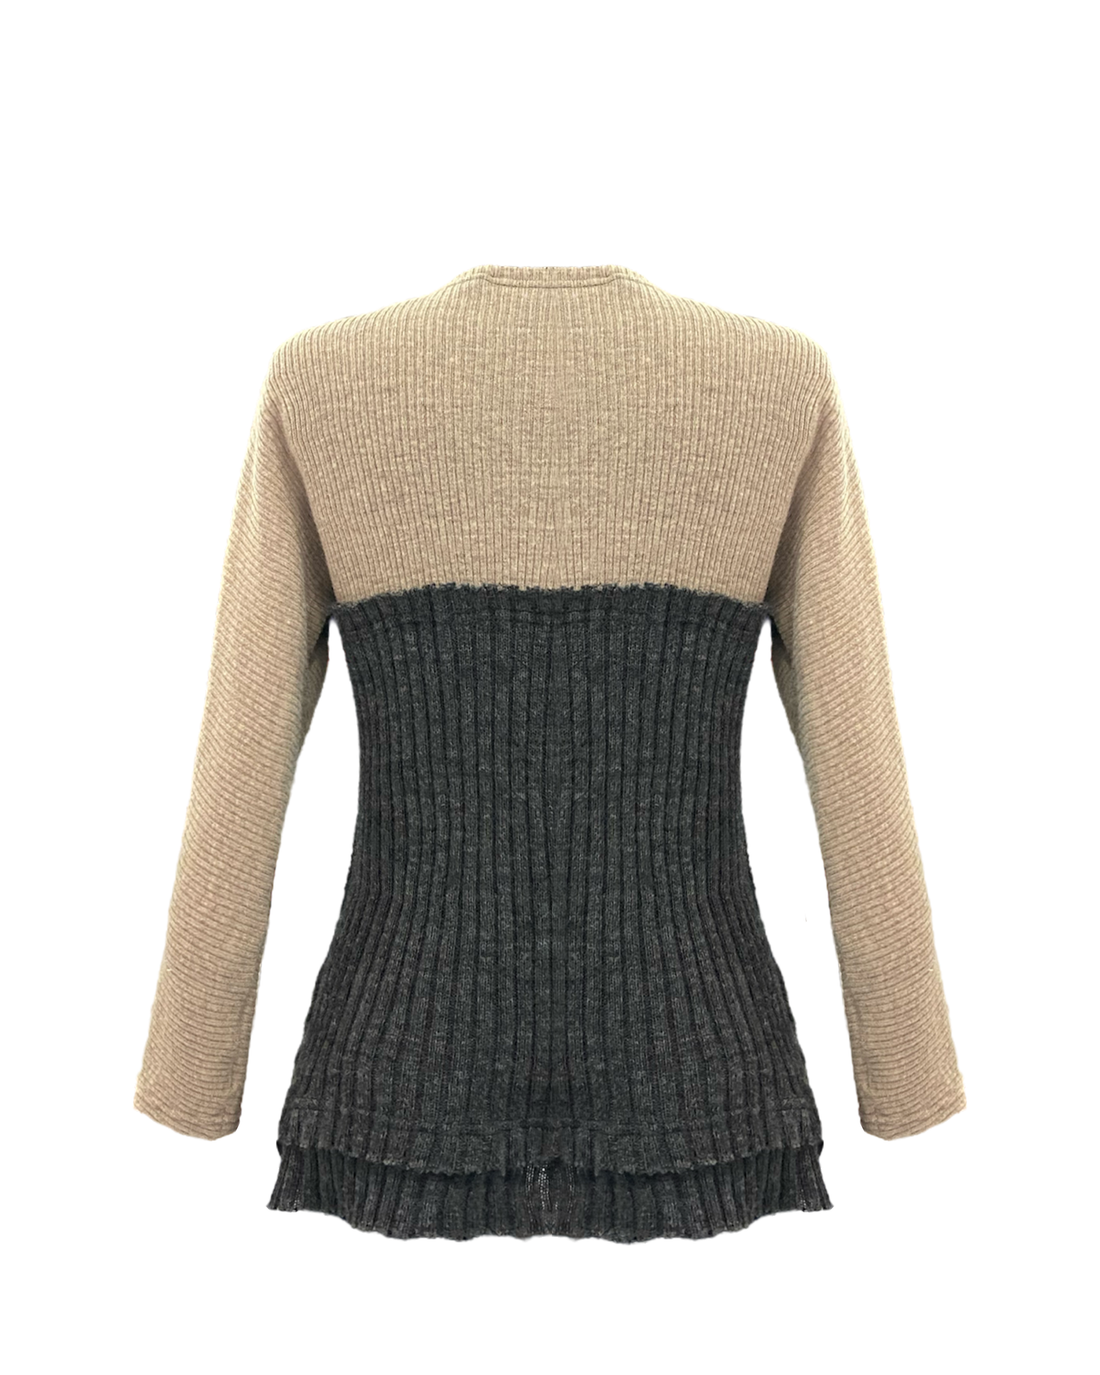 GREY TOP WITH BEIGE LONG SLEEVES AW23/24